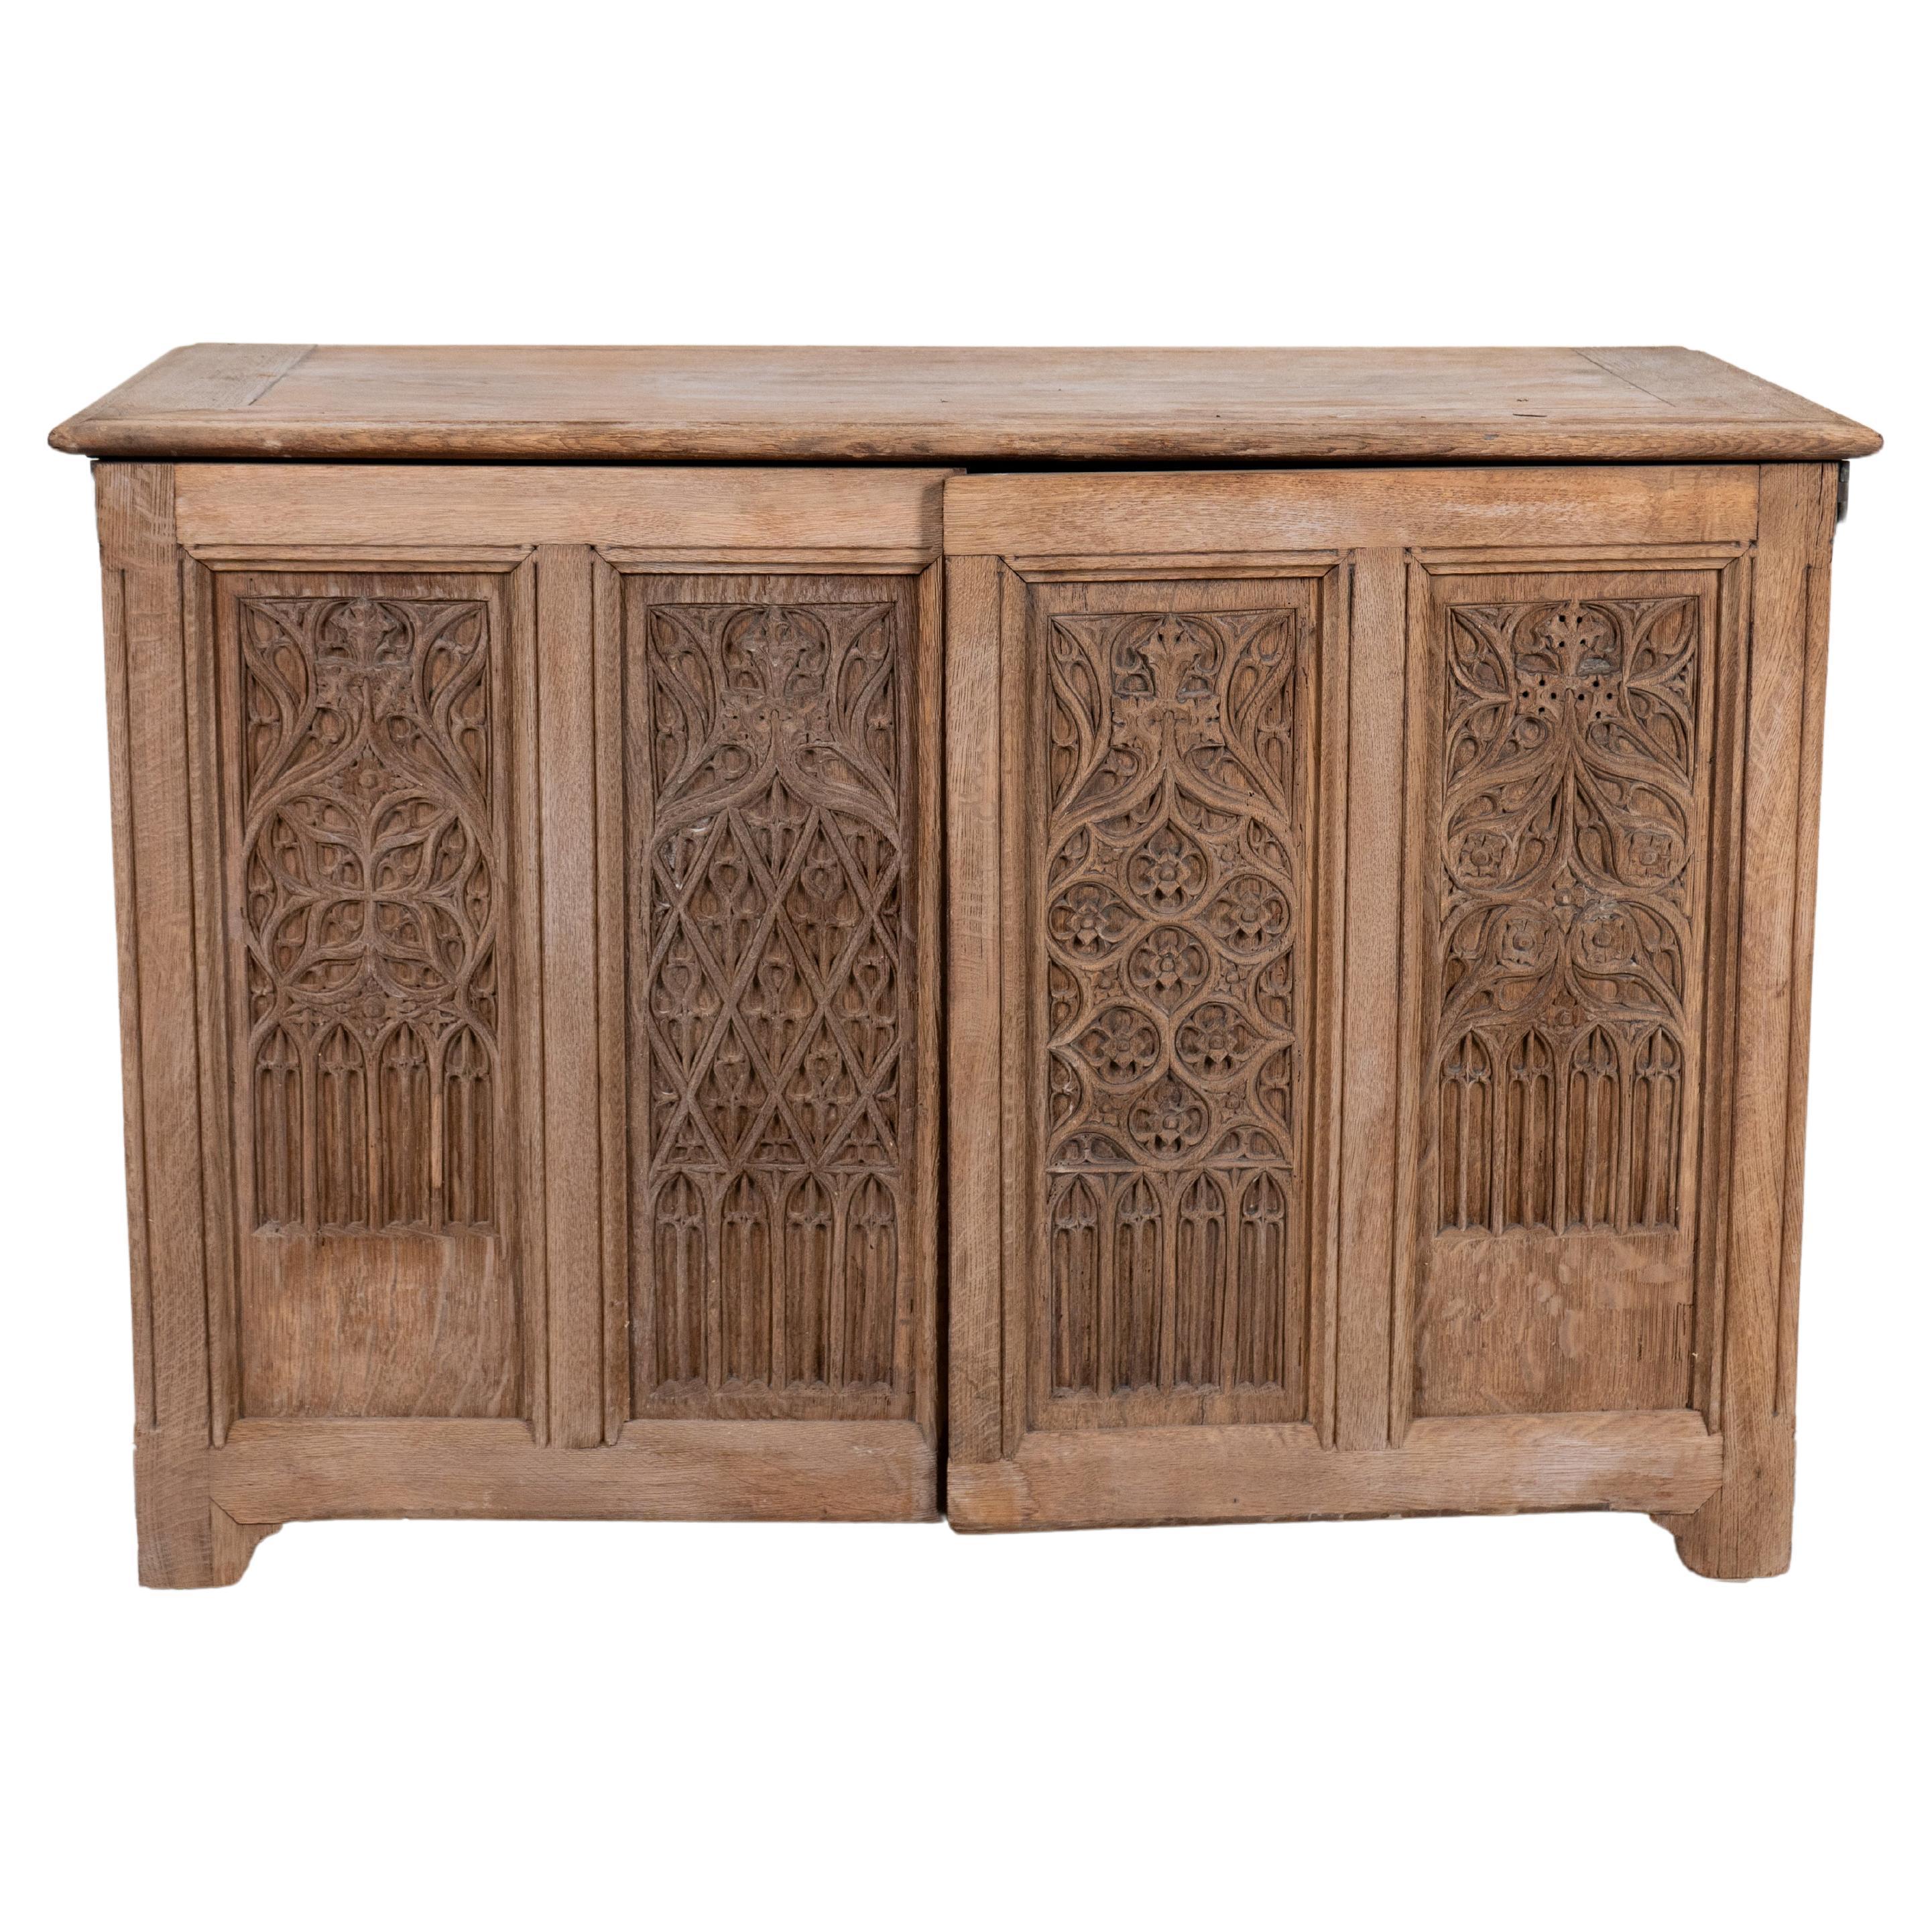 A Gothic Revival French Oak Chest, c.1880